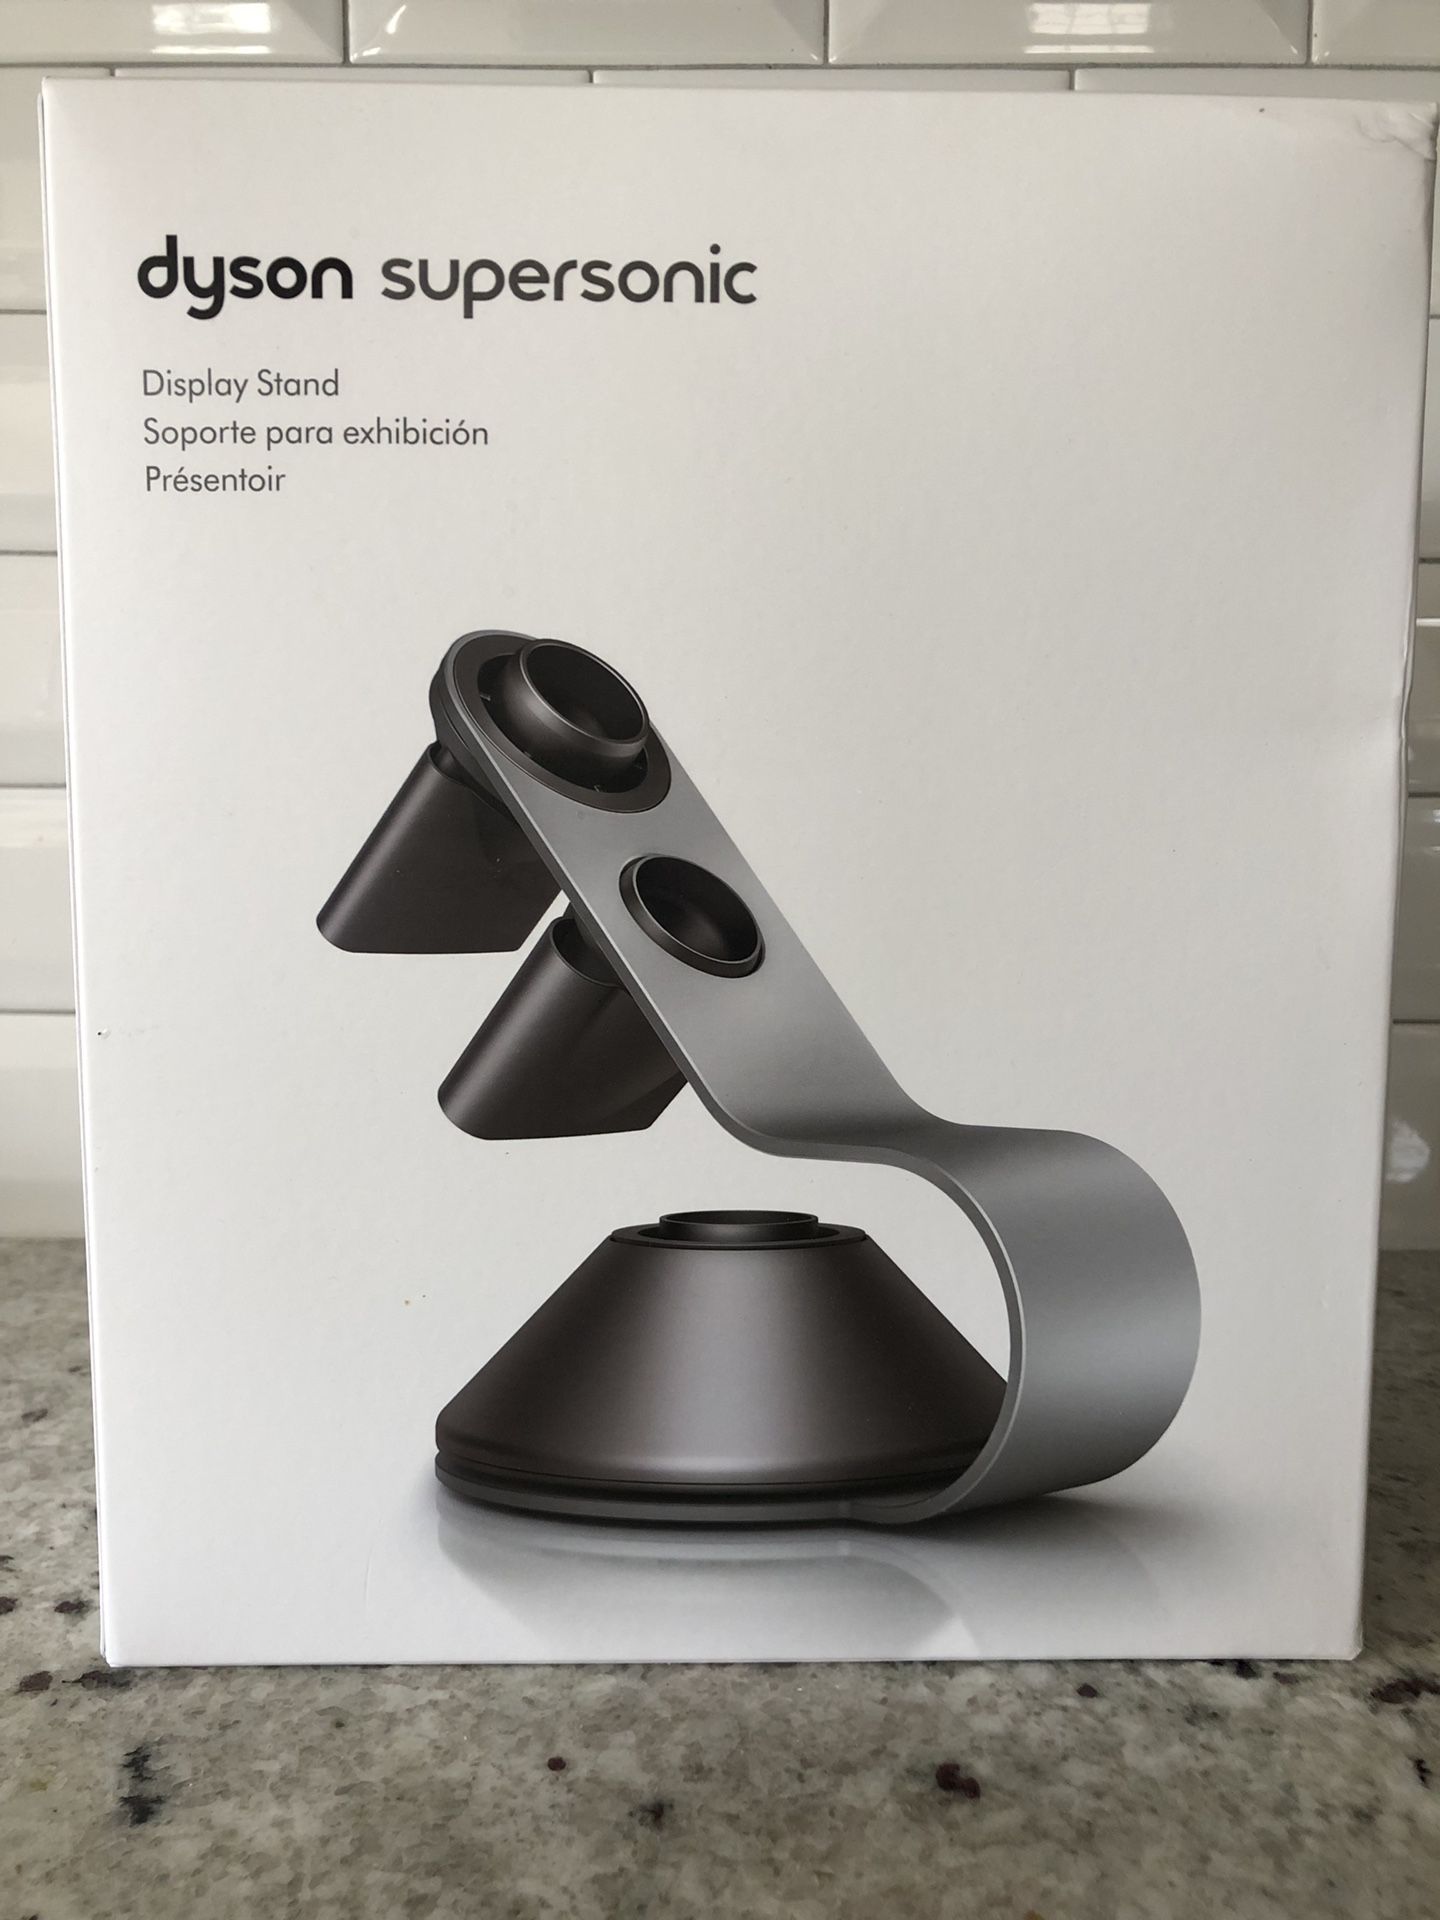 Dyson supersonic display stand for hairdryer